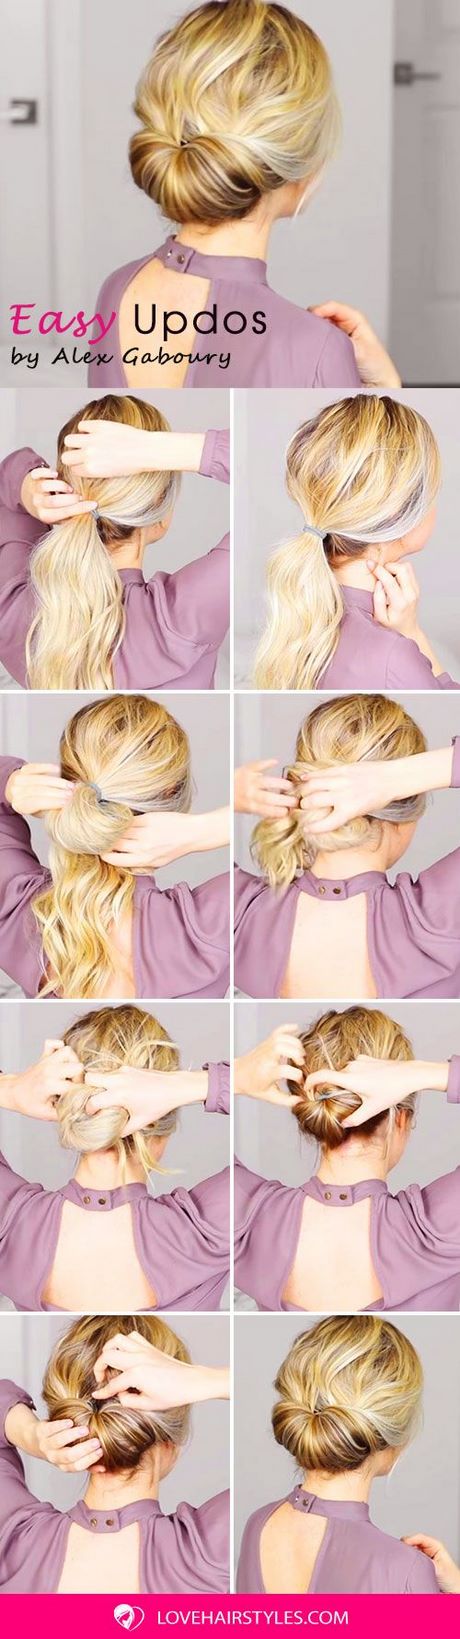 Easy put up hairstyles for long hair easy-put-up-hairstyles-for-long-hair-27_7